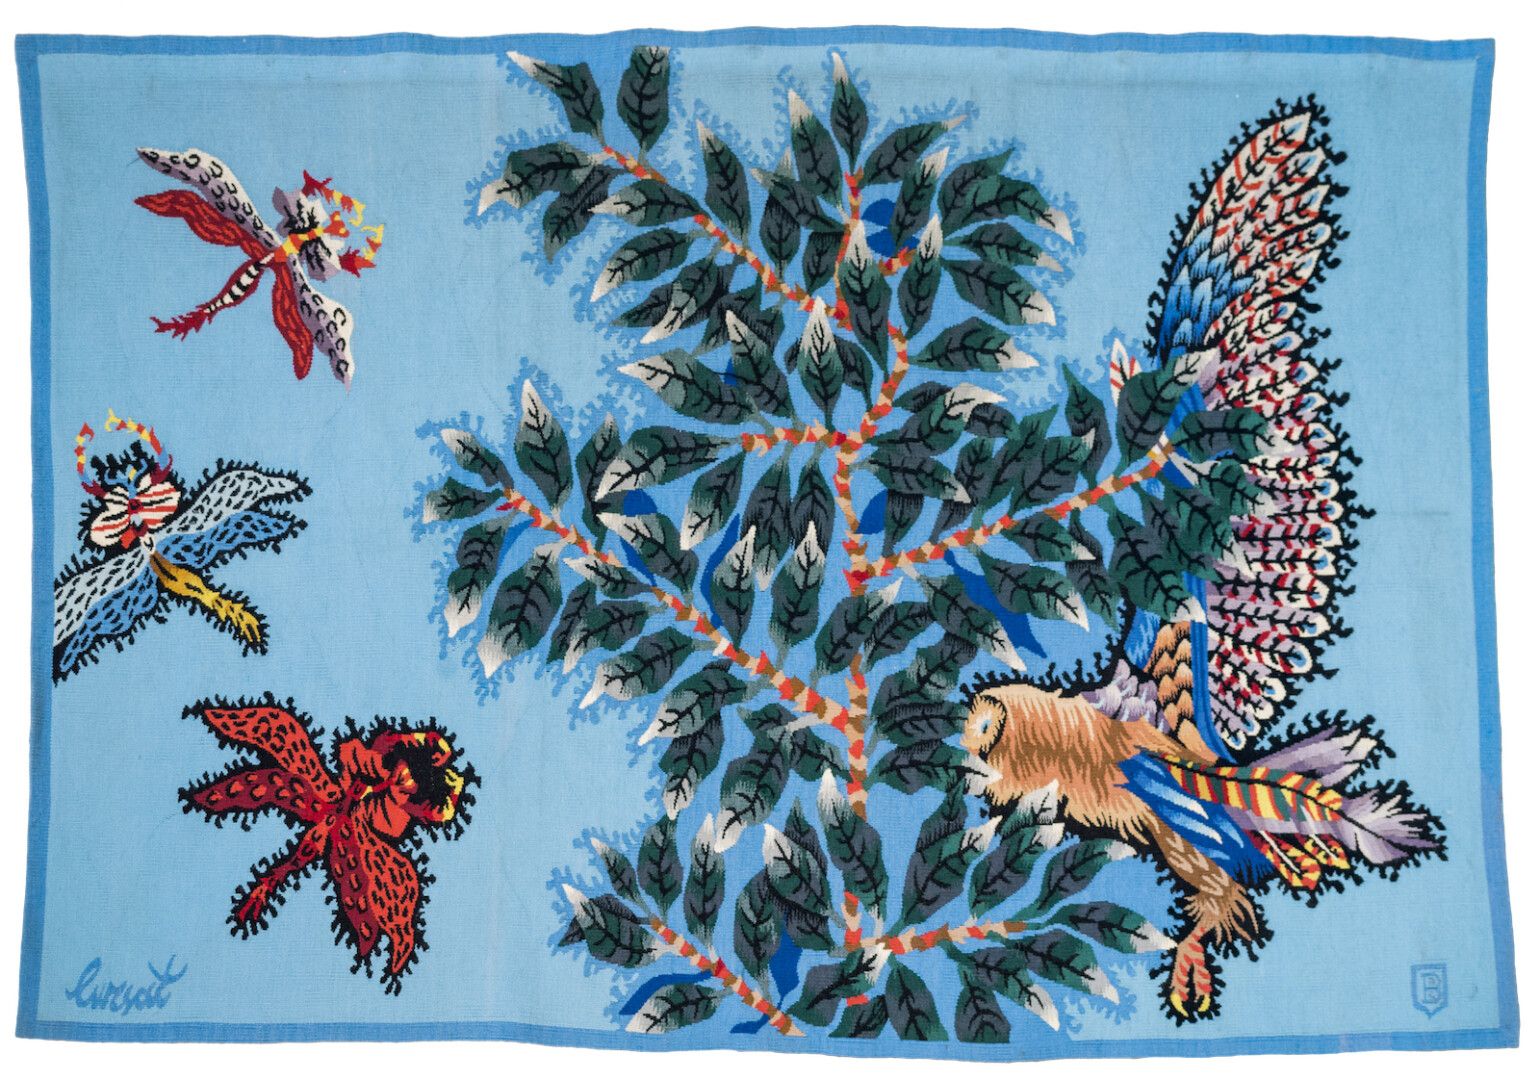 Null Jean LURCAT (1892 - 1966)

The three insects

Tapestry

122 x 178 cm